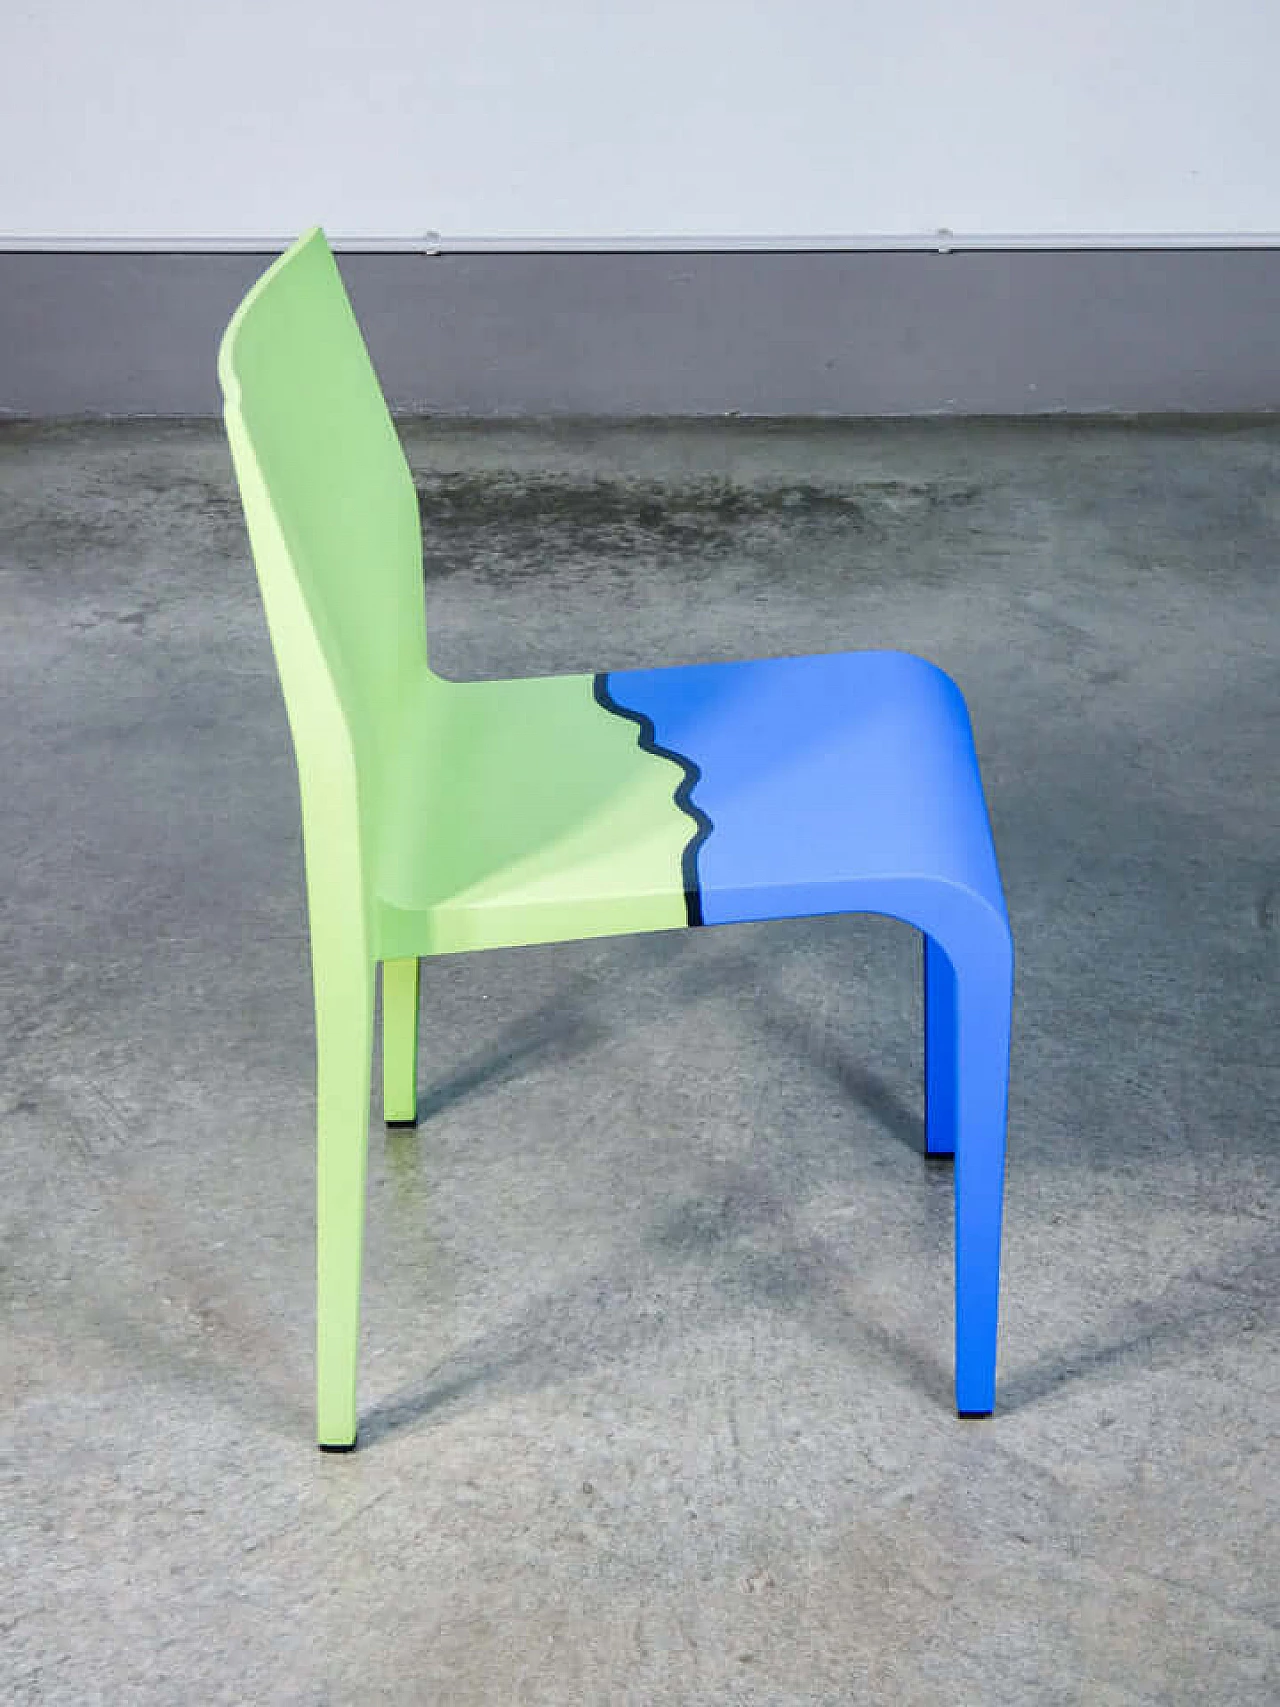 Laleggera 44 chair by Riccardo Blumer for Alias painted by Michelangelo Pistoletto, 2009 7